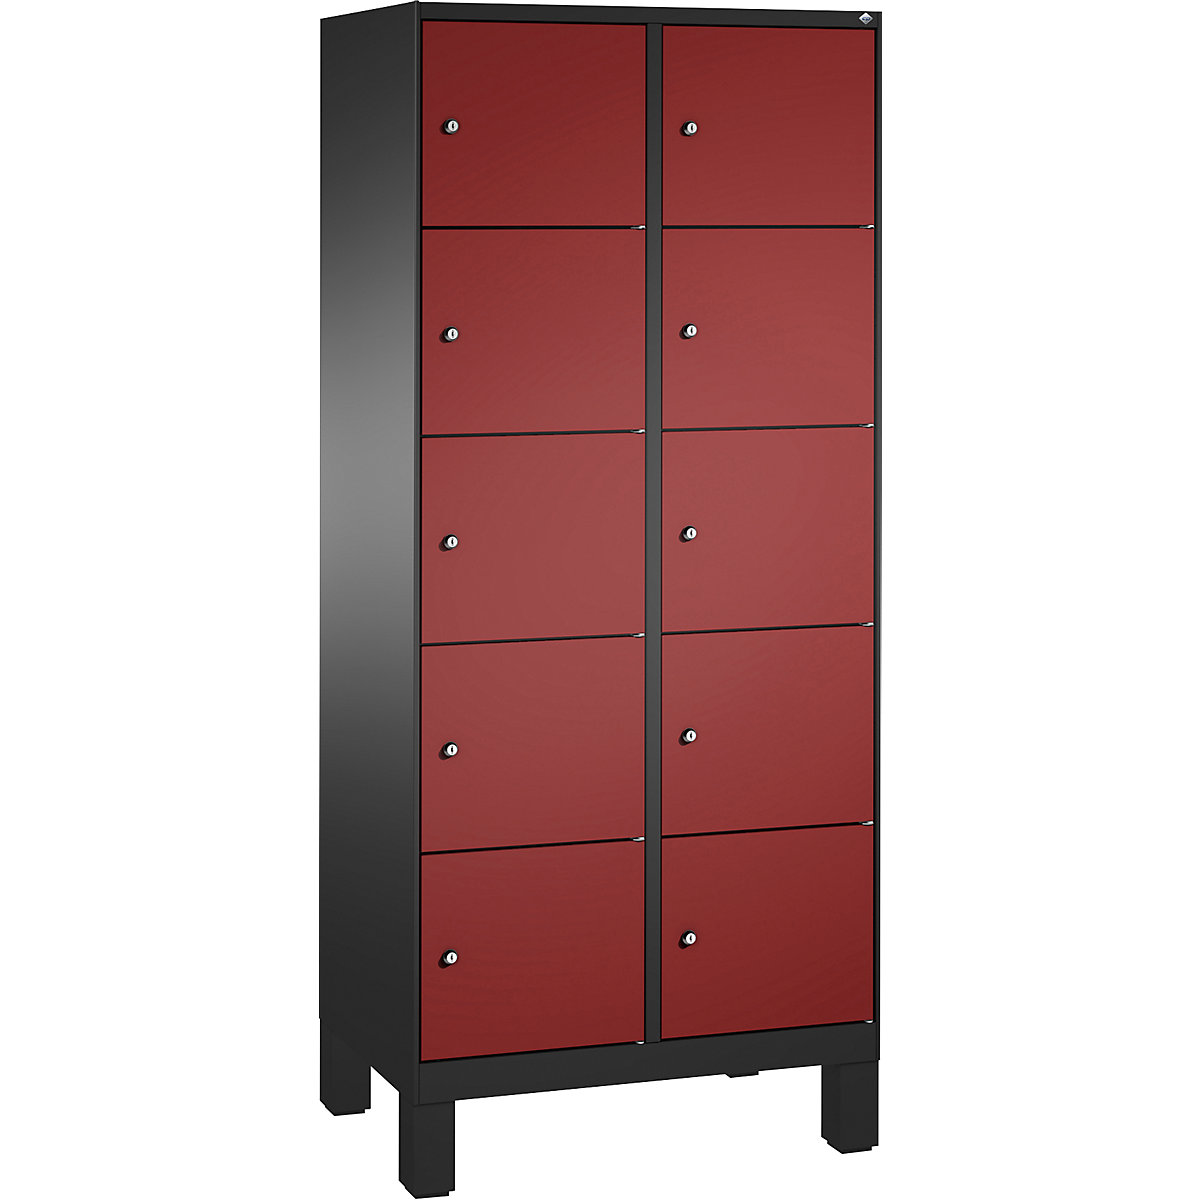 EVOLO locker unit, with feet – C+P, 2 compartments, 5 shelf compartments each, compartment width 400 mm, black grey / ruby red-4